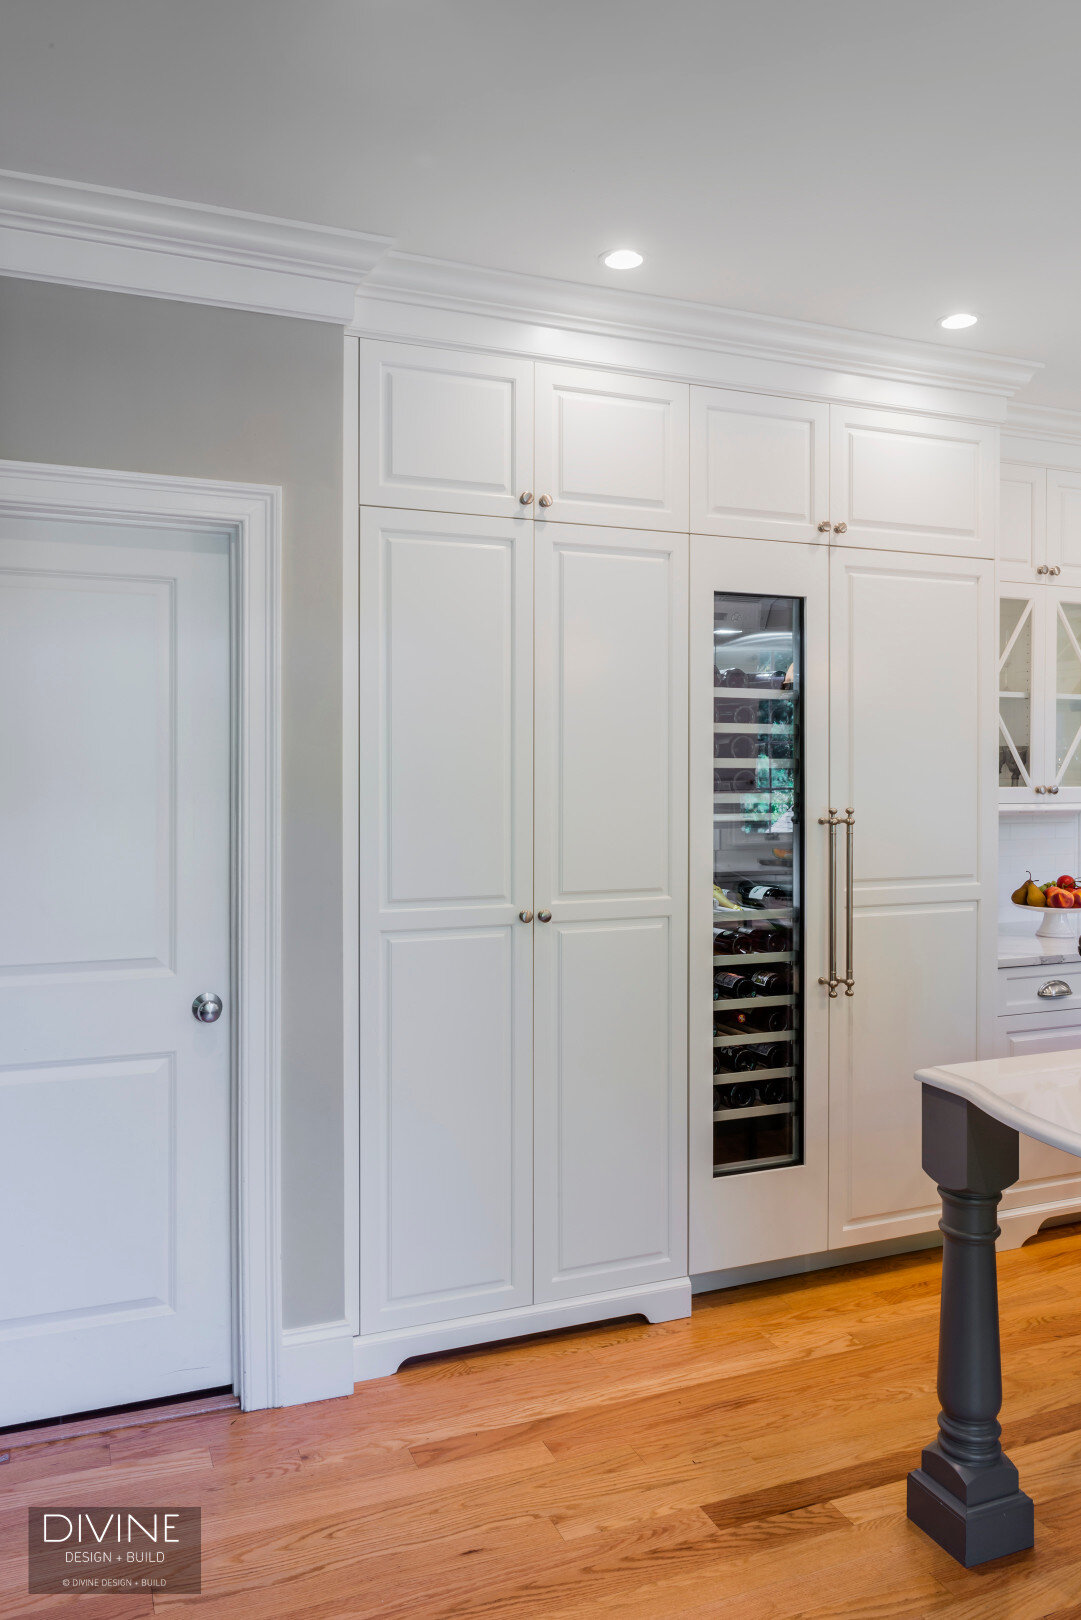  traditional shaker style kitchens with stainless steel farmhouse sink, wolf appliances and chrome pendant lights. Calacatta countertops and medium hardwood floors. Paneled refrigerator. 